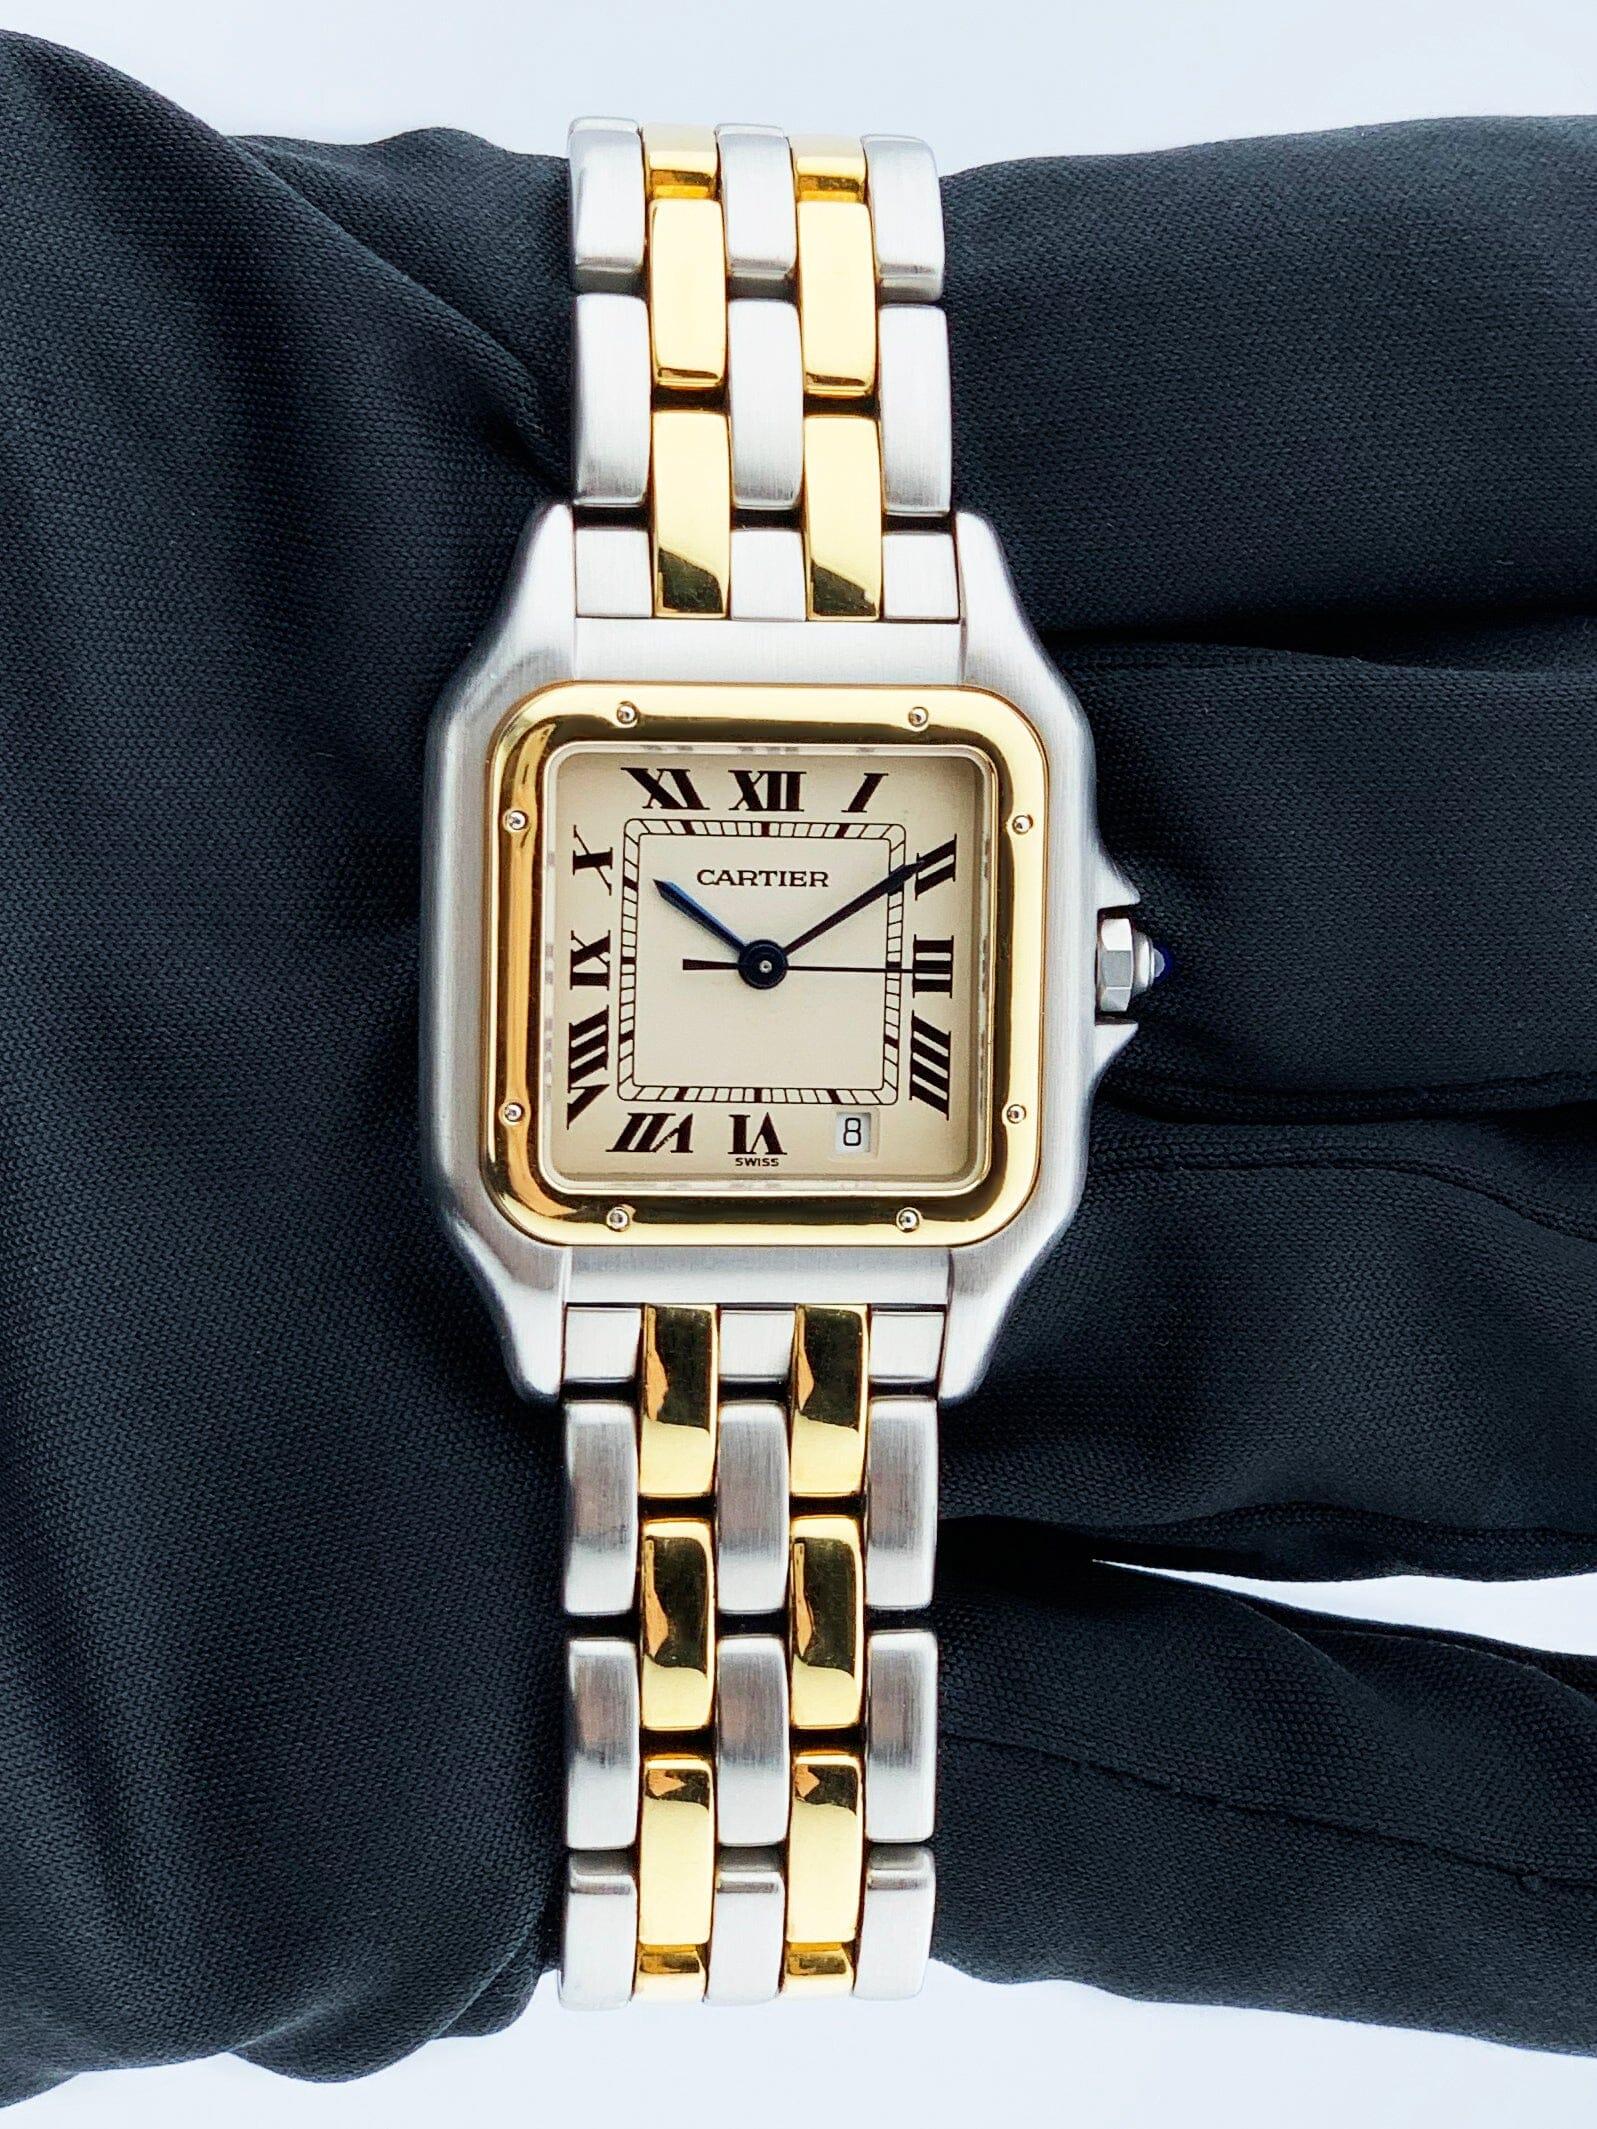 Cartier Panthere Midsize Ladies Watch. 27mm Stainless Steel case. 18K Yellow Gold bezel. Off-White dial with Blue steel hands and Roman numeral hour markers. Minute markers on the inner dial. Date display at the 5 o'clock position. Stainless steel